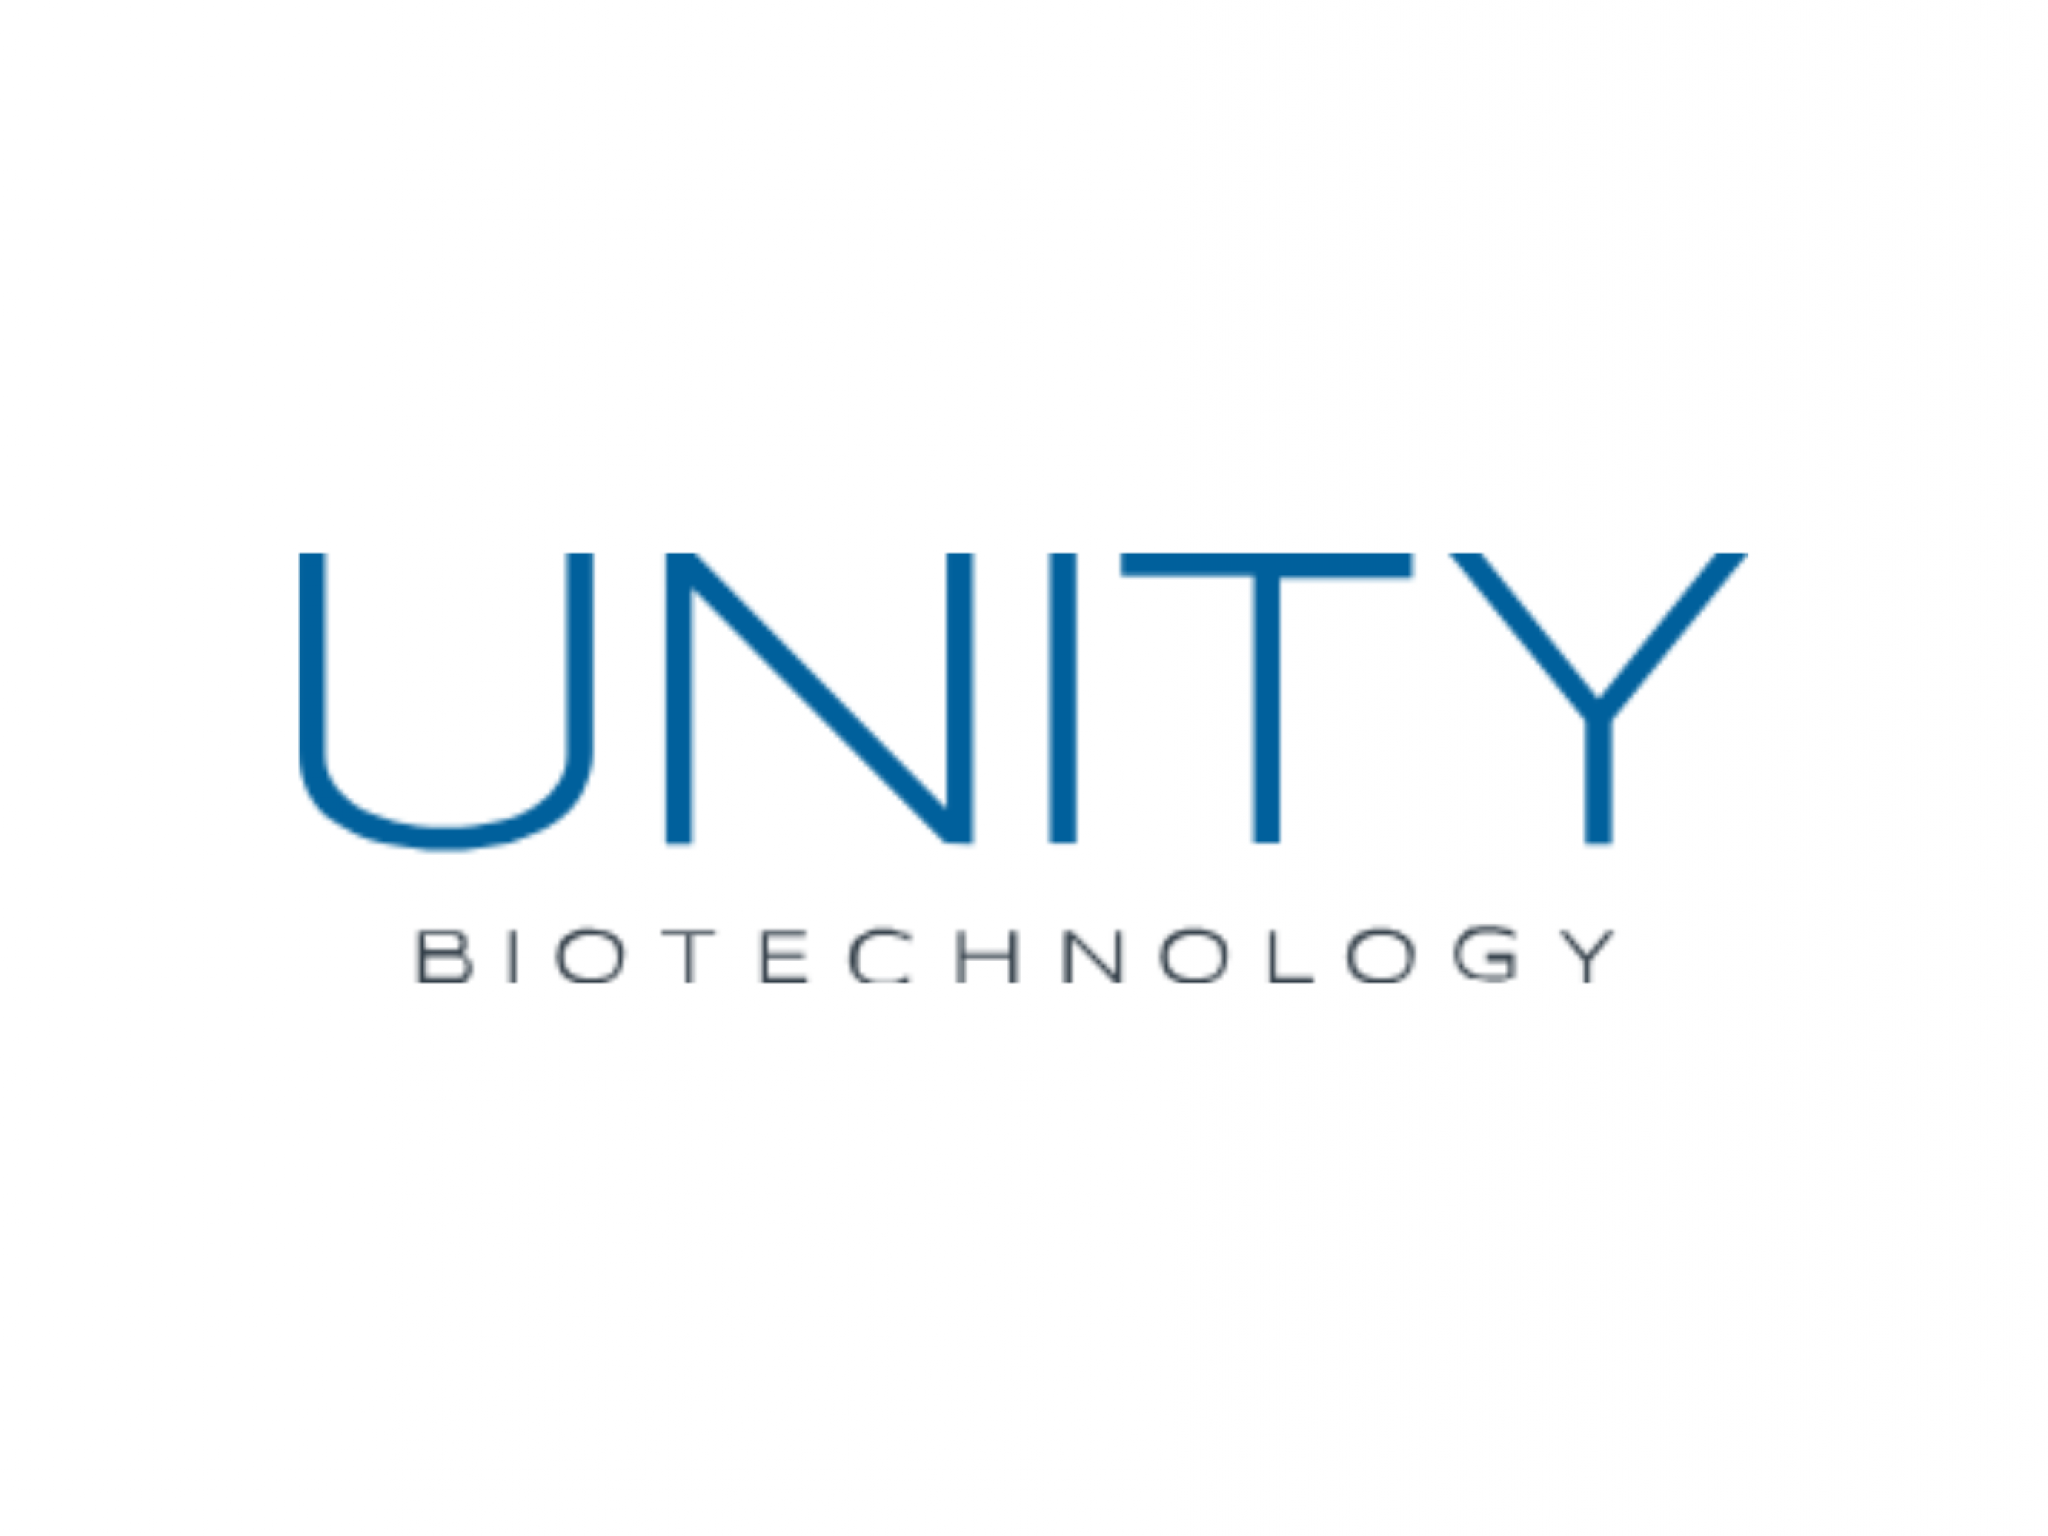  unity-biotechnology-upgraded---analyst-highlights-cash-strength--execution 